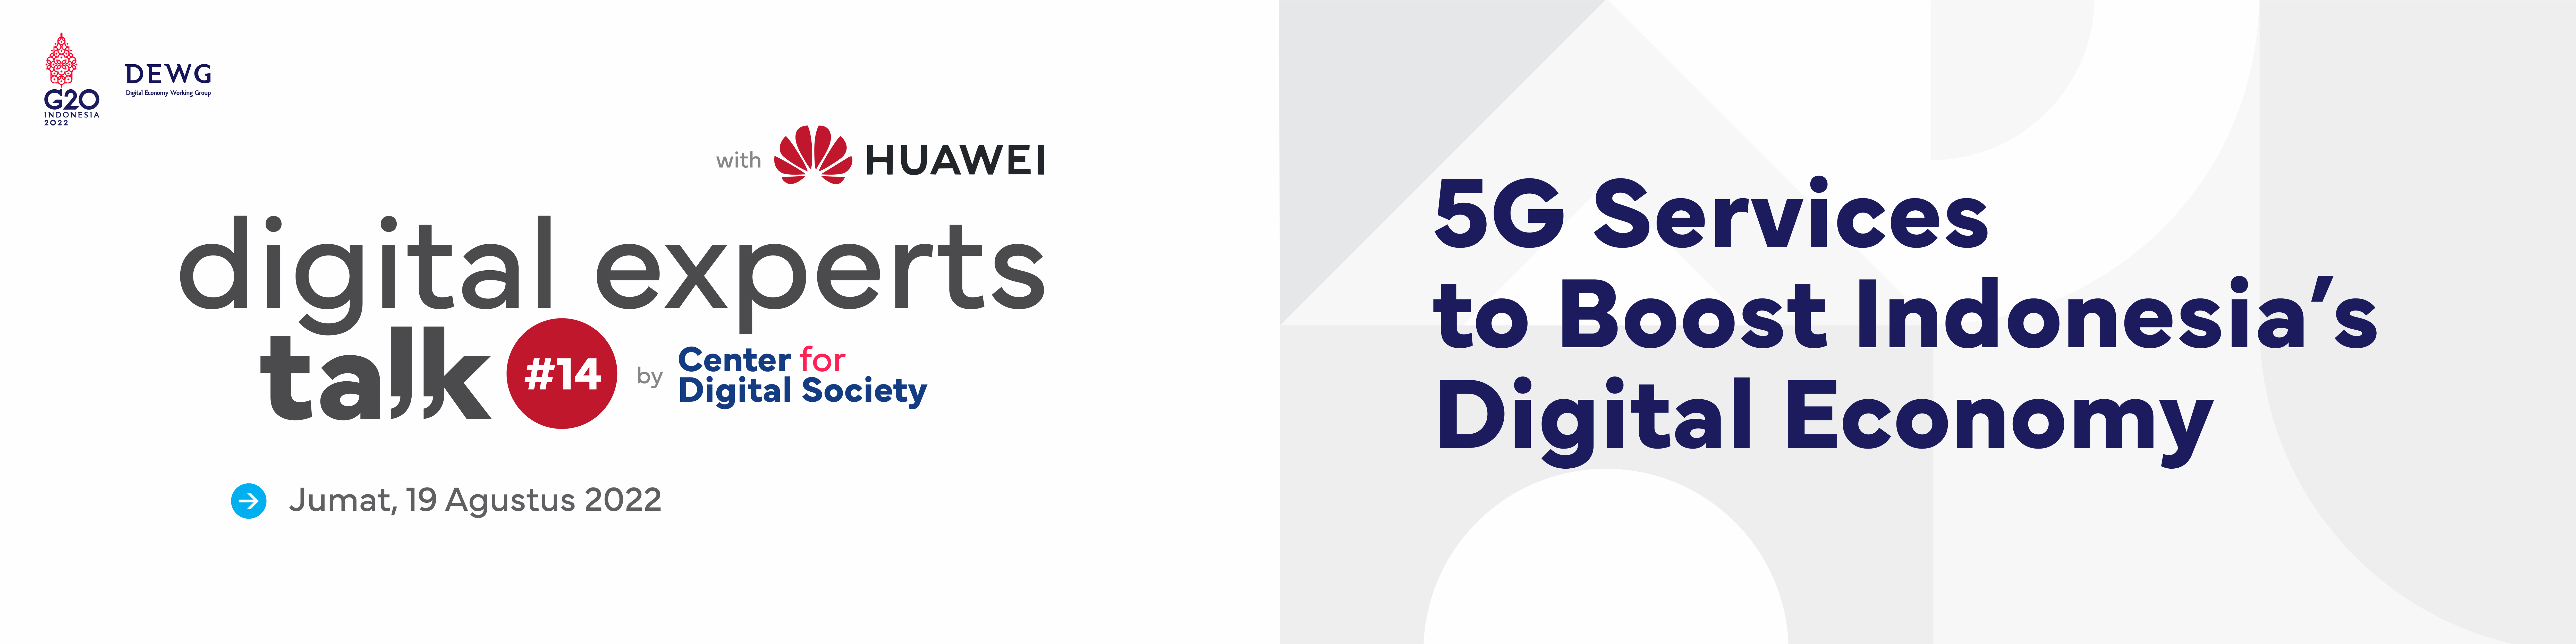 [PRESS RELEASE] Huawei Indonesia, CfDS UGM, Kominfo & APJII Respond to 5G Infrastructure for Indonesia’s Digital Economy | DET #14